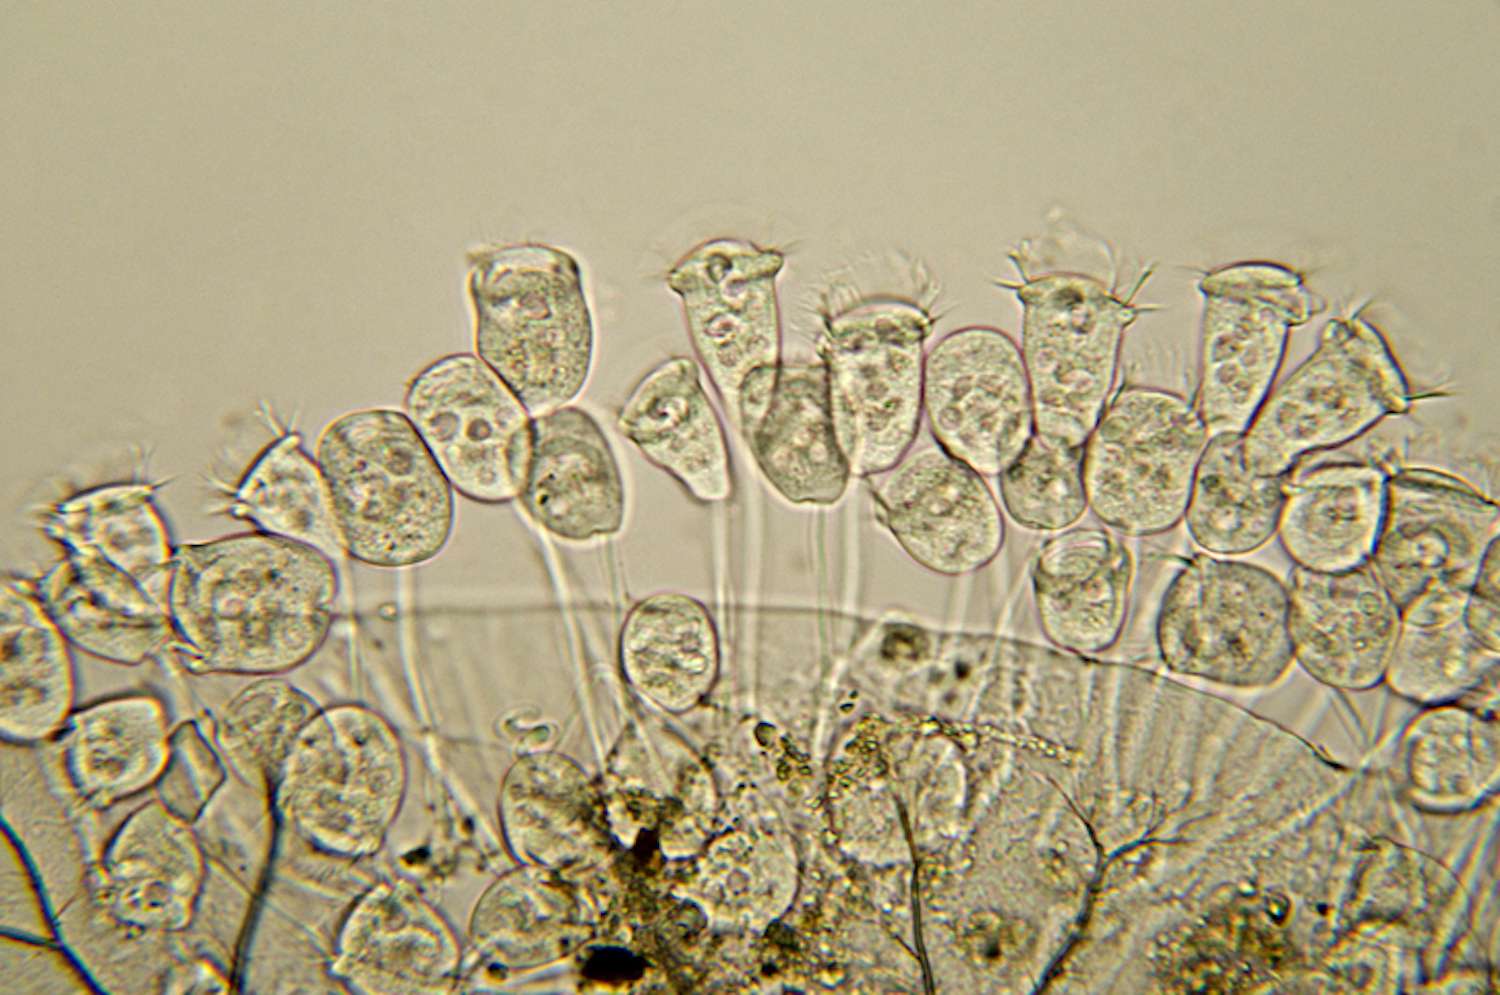 A micrograph of the vorticella species